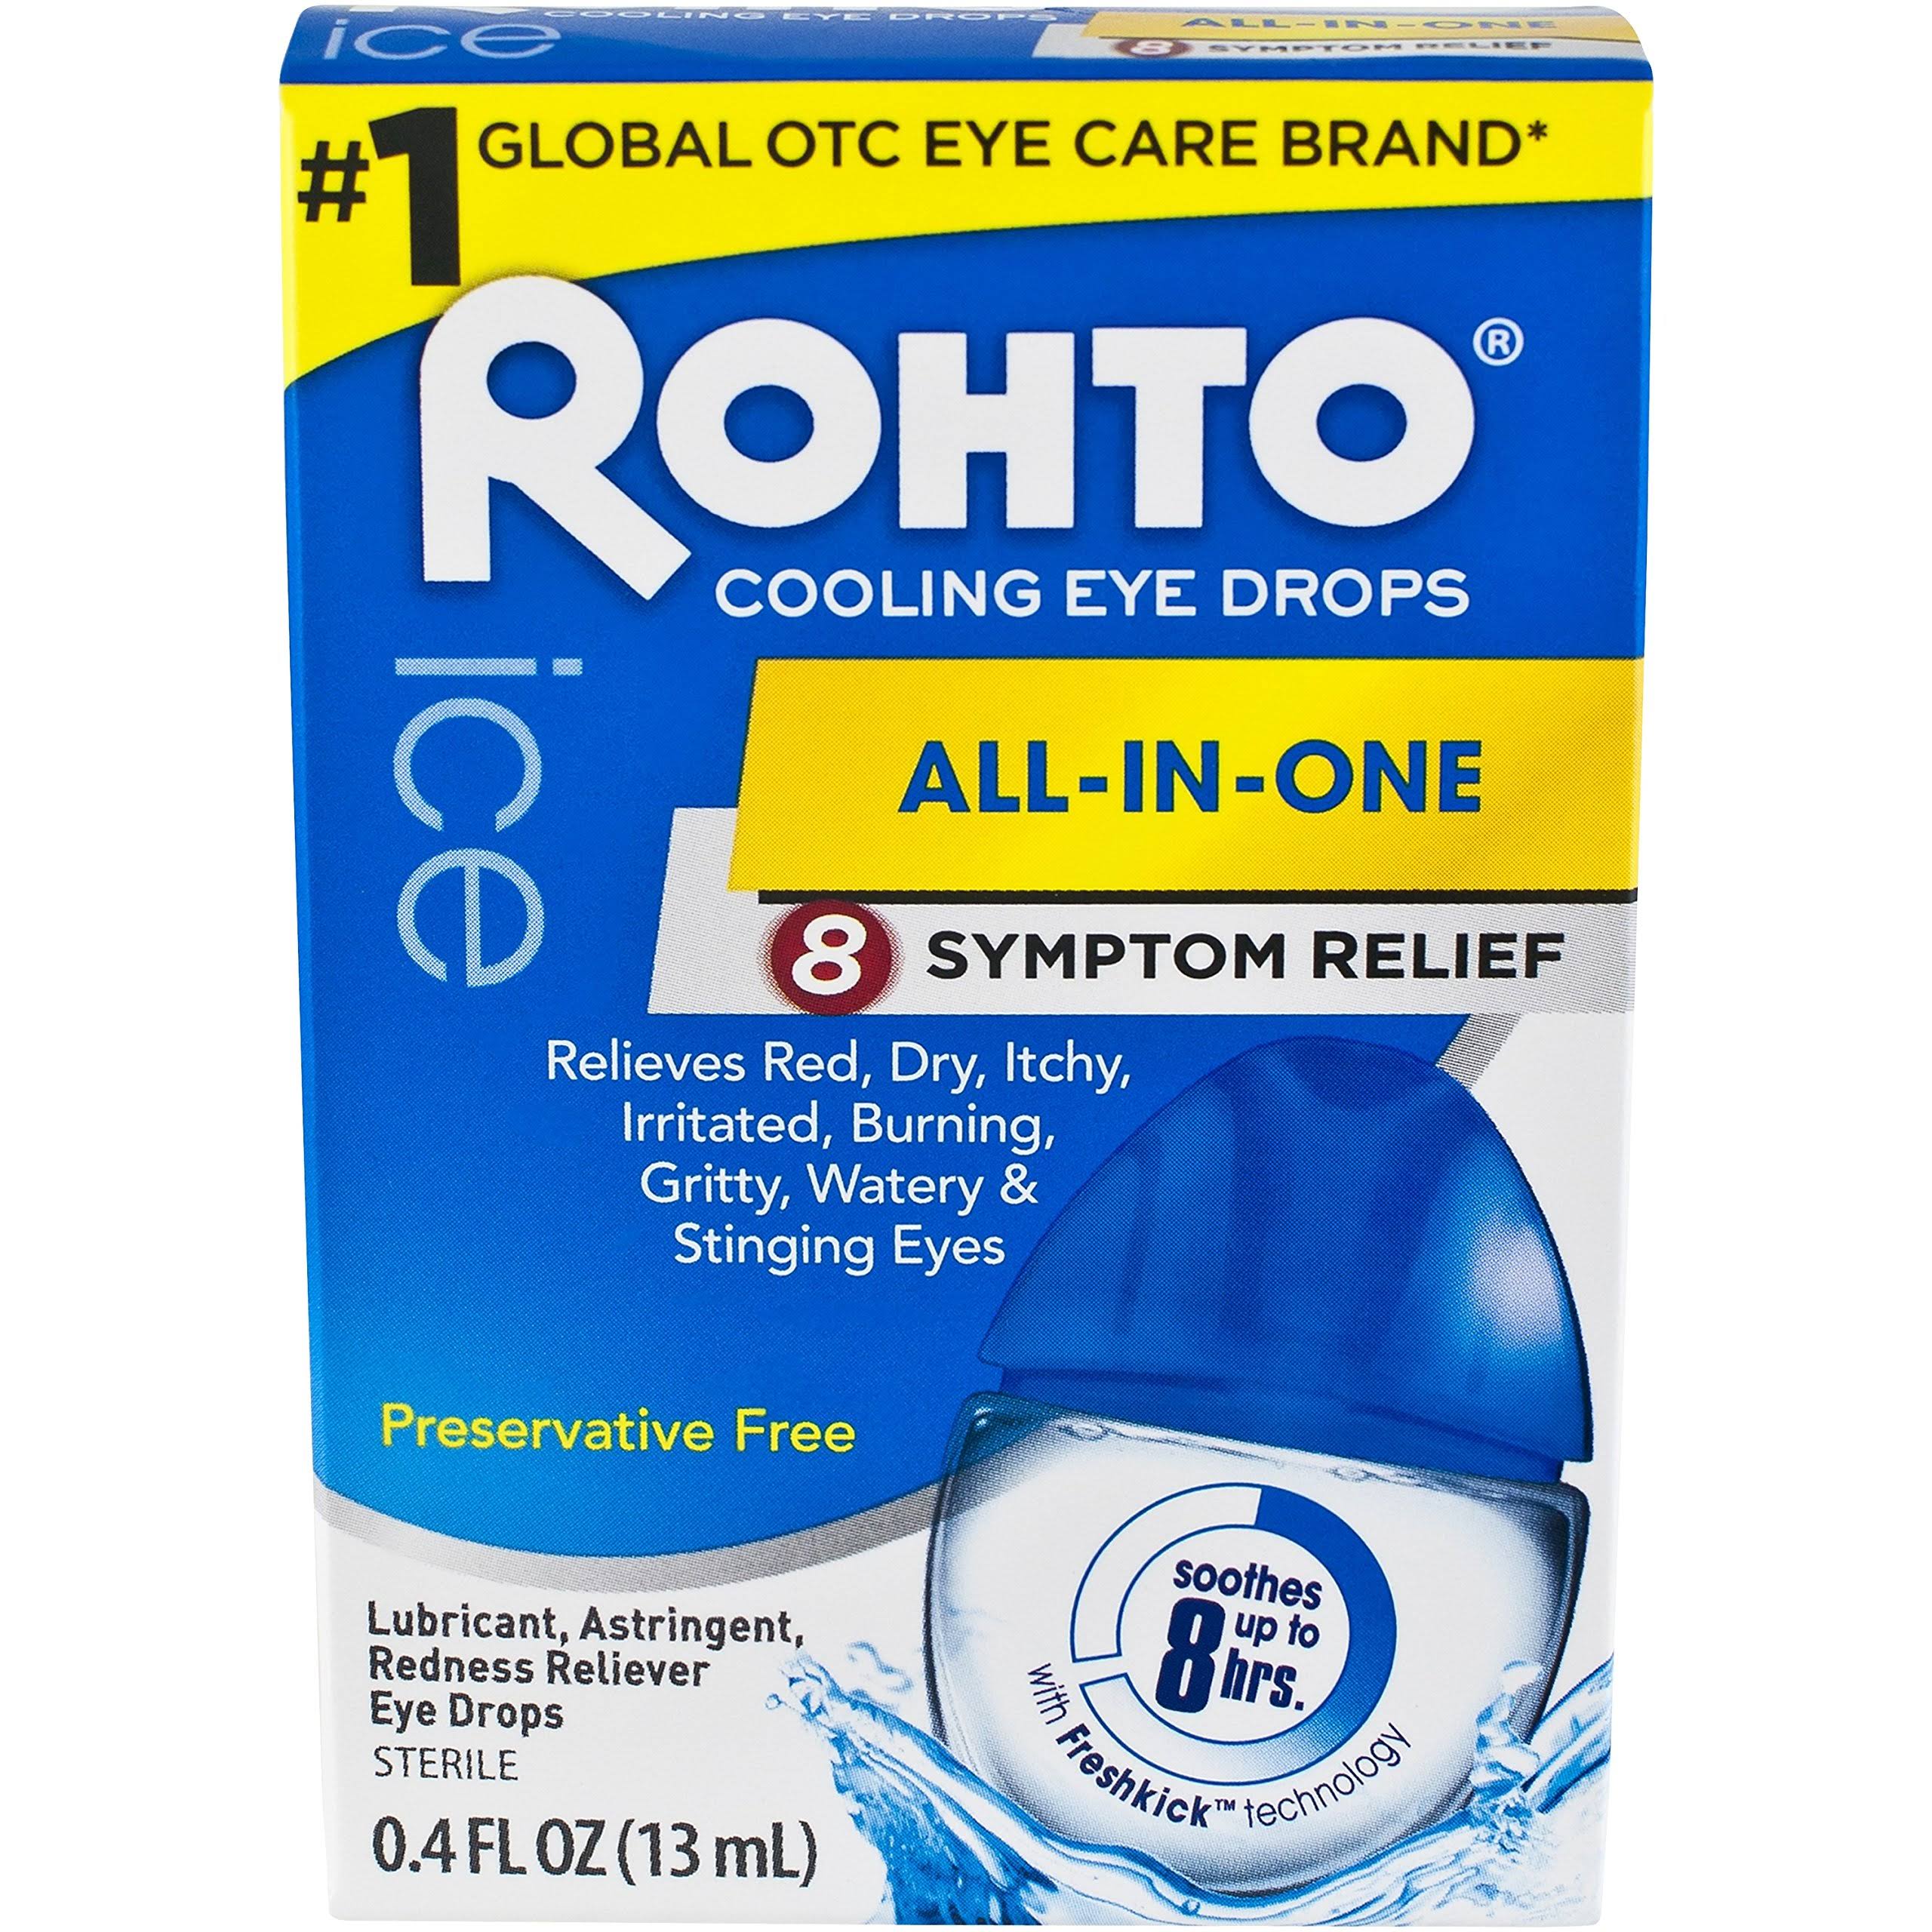 Rohto Ice All-in-One 8 Symptom Relief Sterile Cooling Eye Drops - 0.4 fl oz